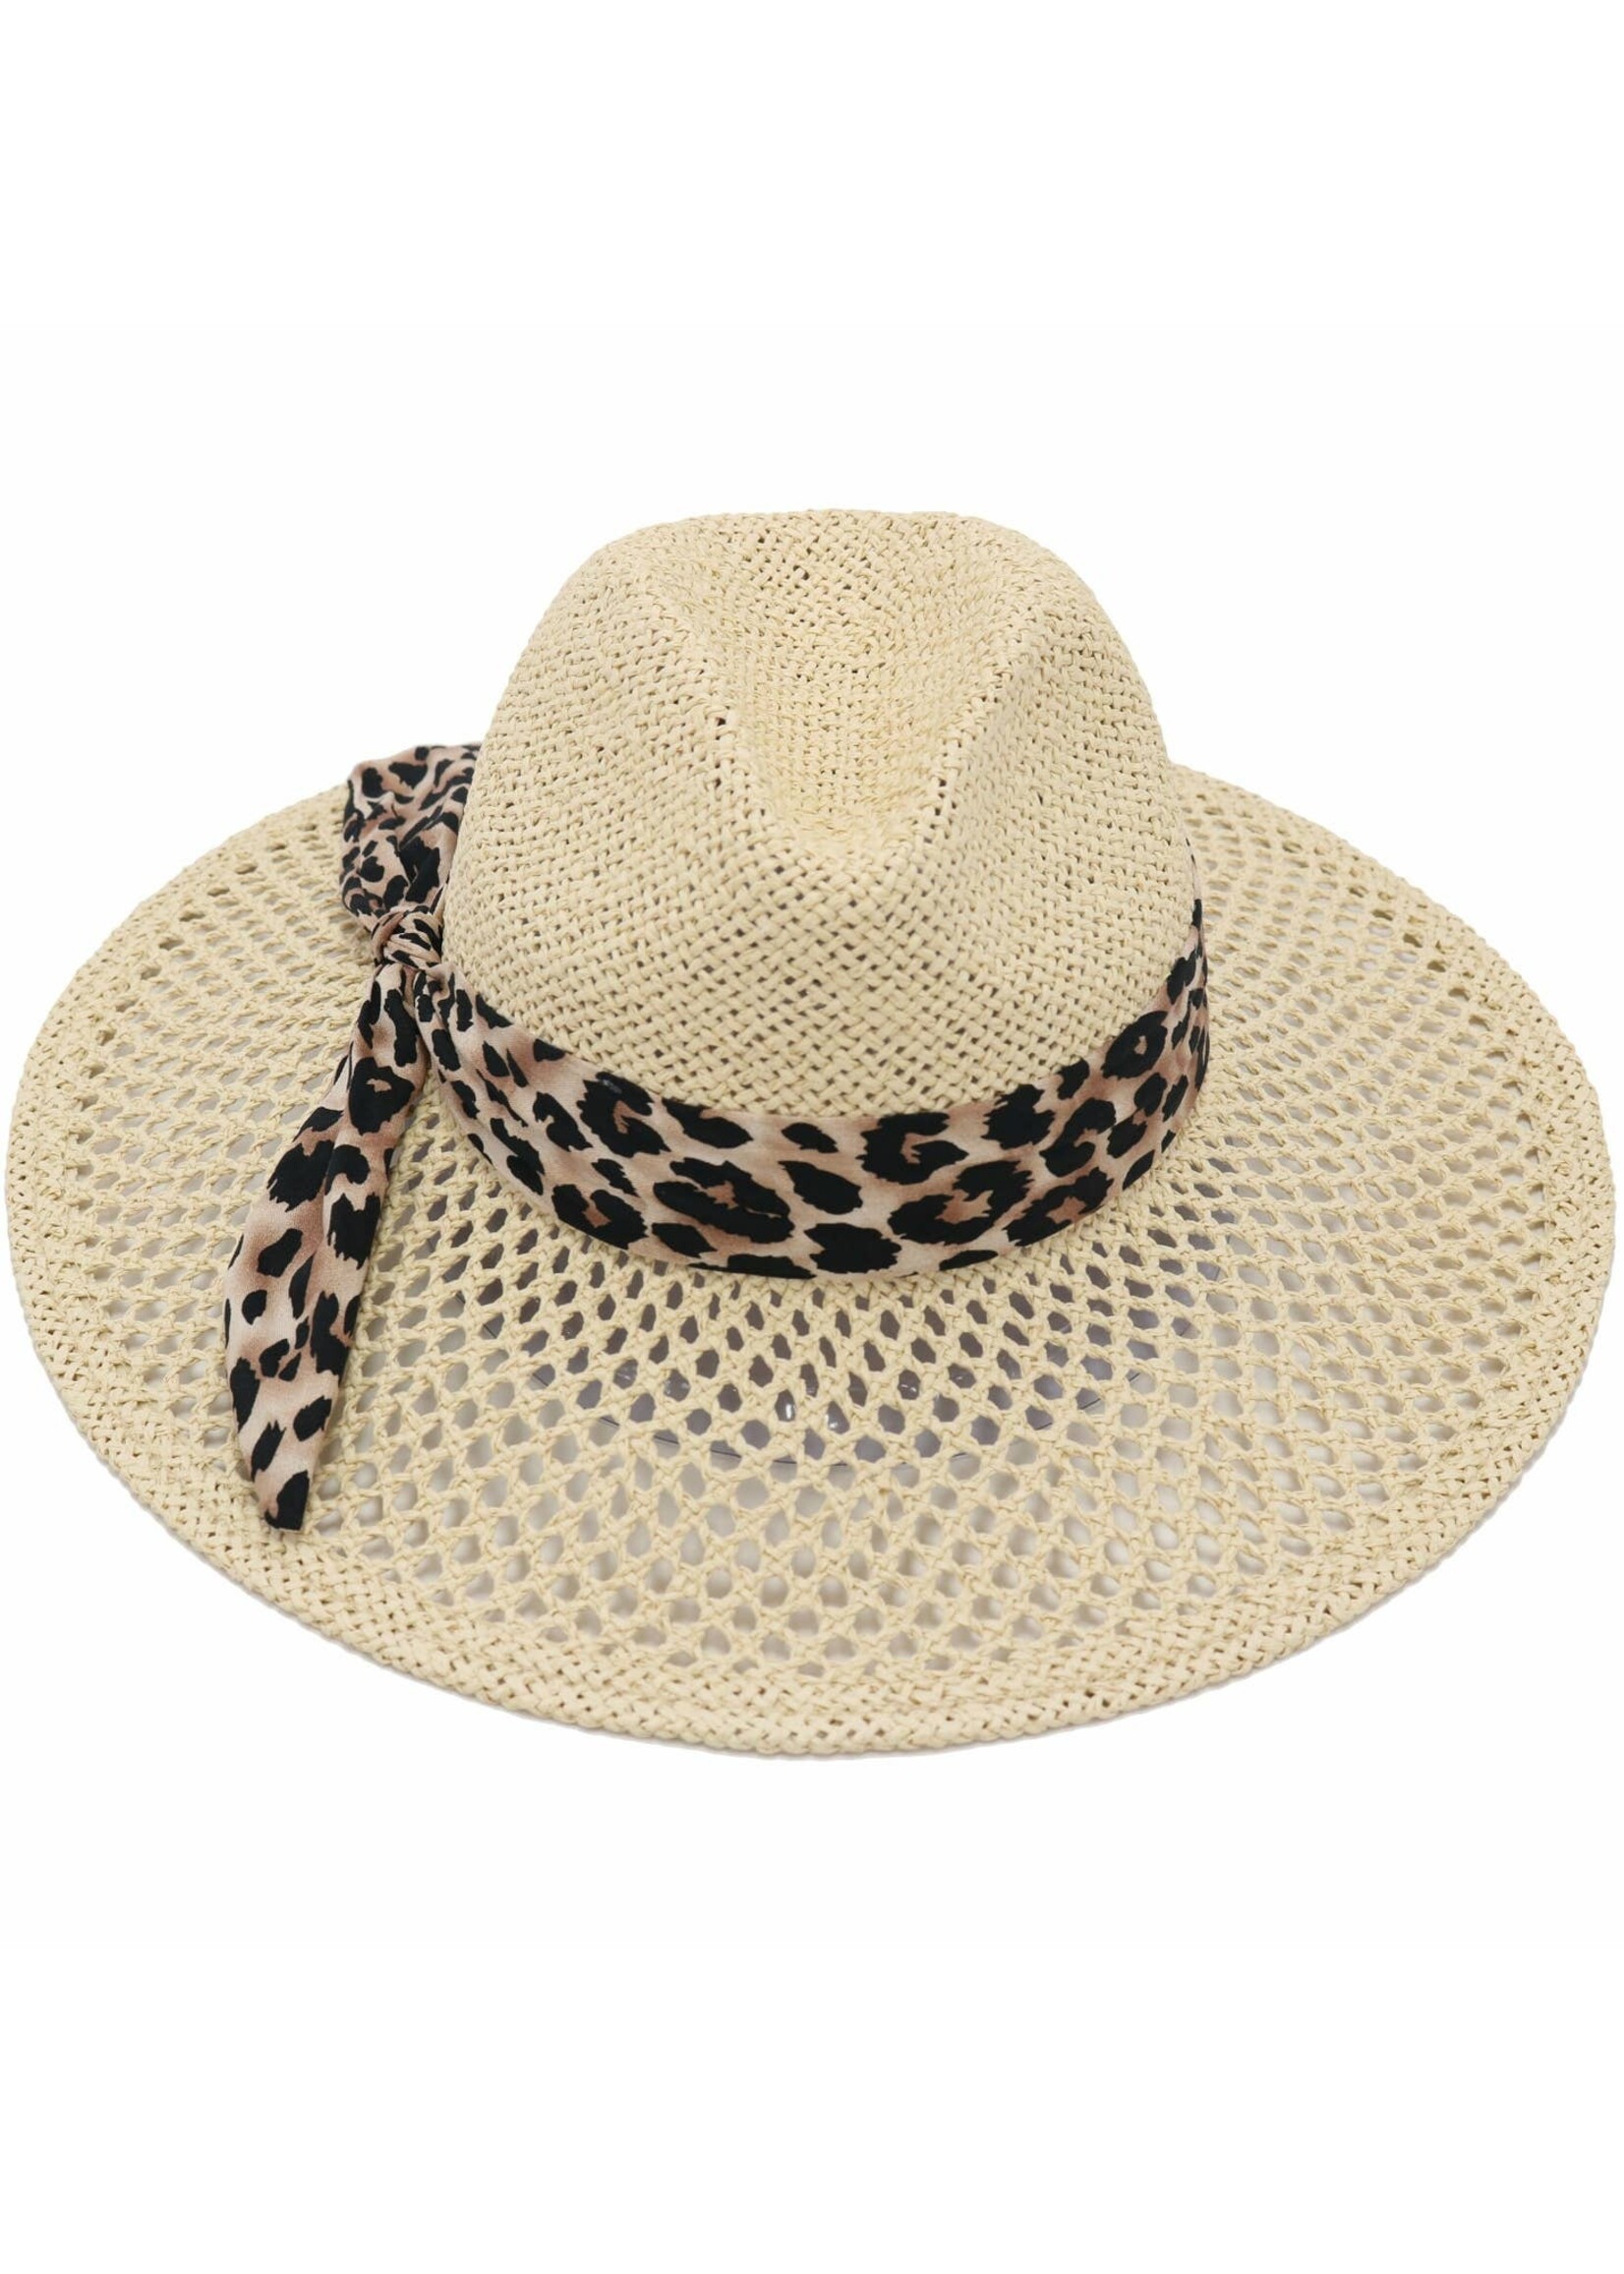 CCB ST907 PAN HAT LEOPARD BAND